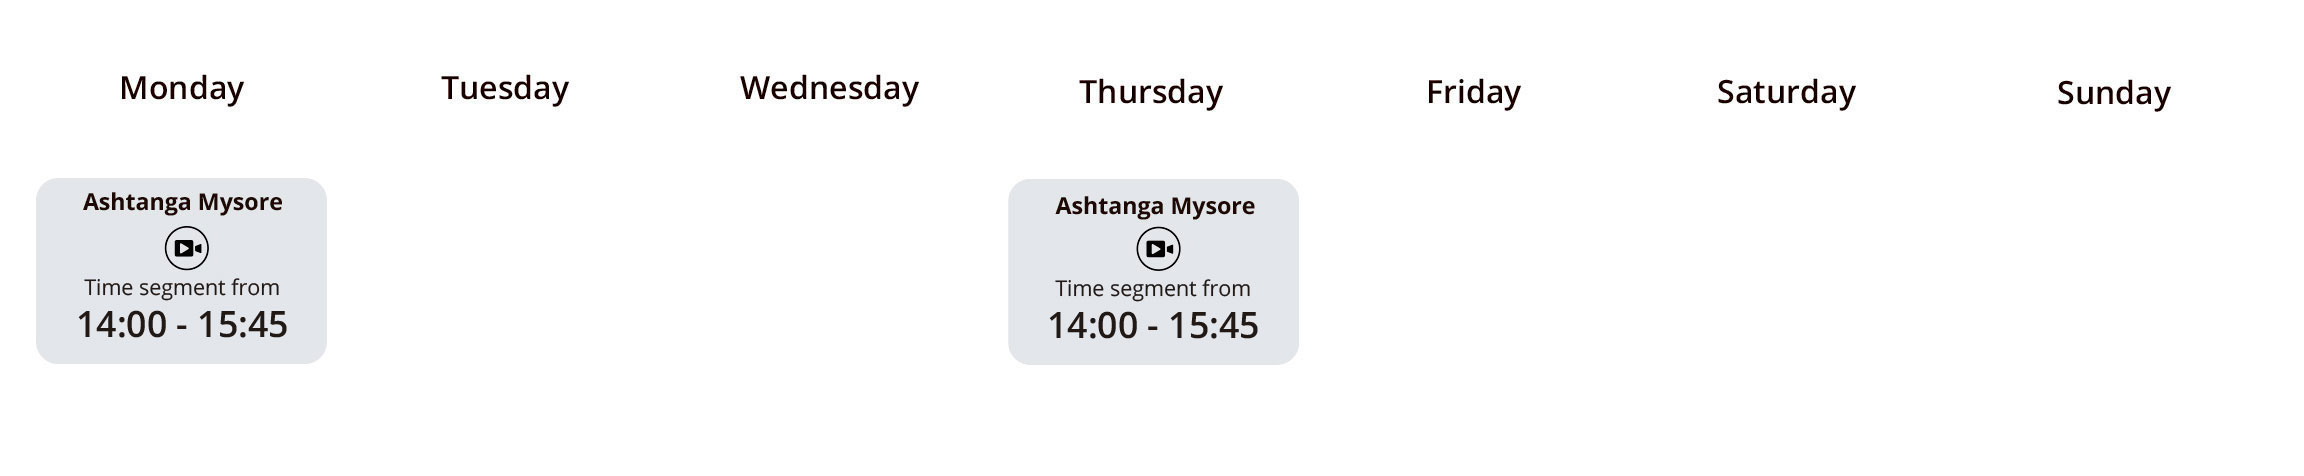 Timetable - afternoon | The Mysore Shala